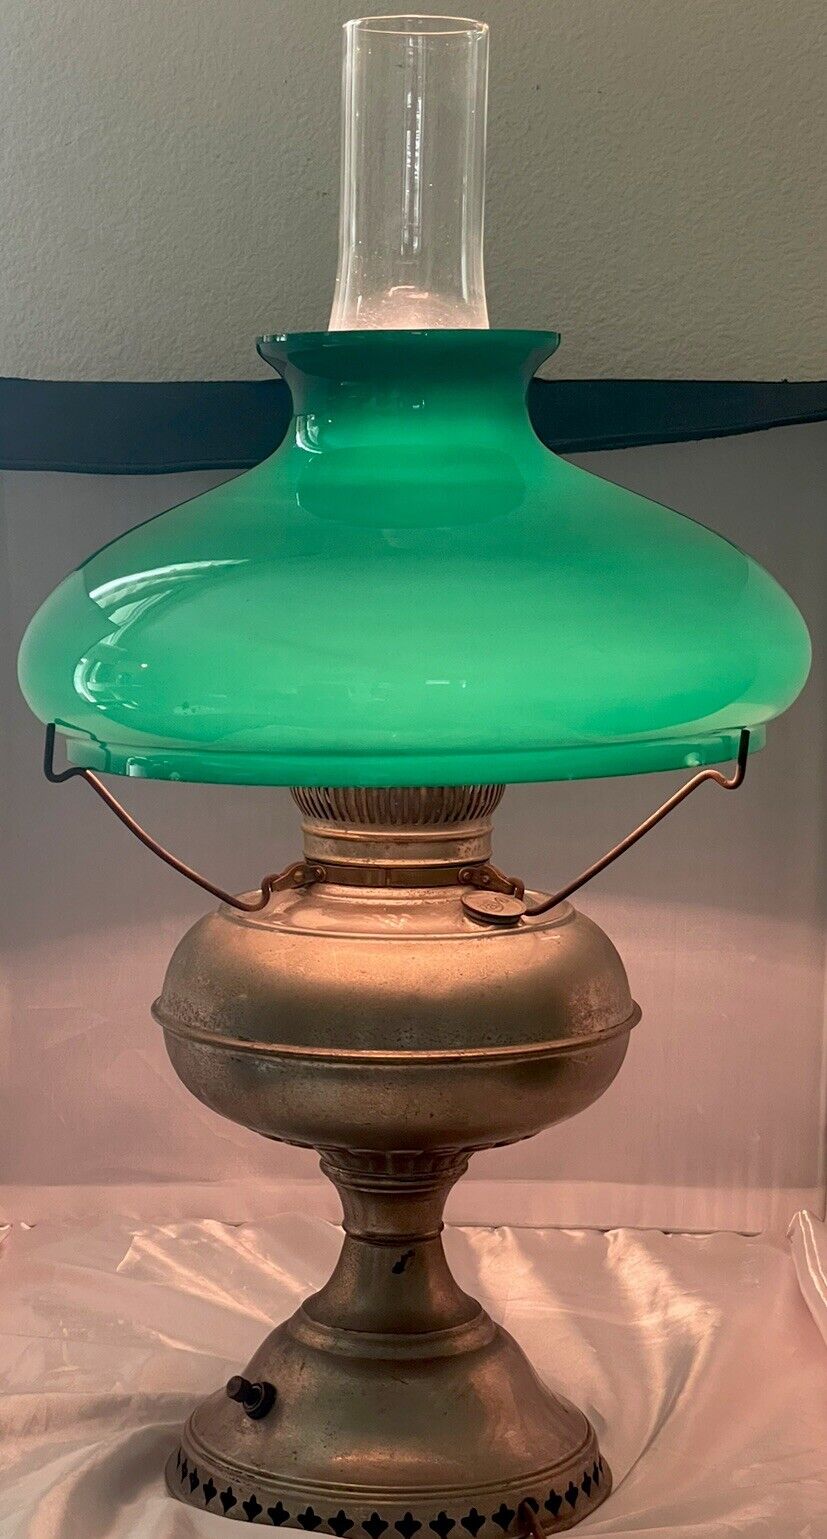 Antique Rayo Electrified Oil Lamp With Emerald Green Glass Melon Shade